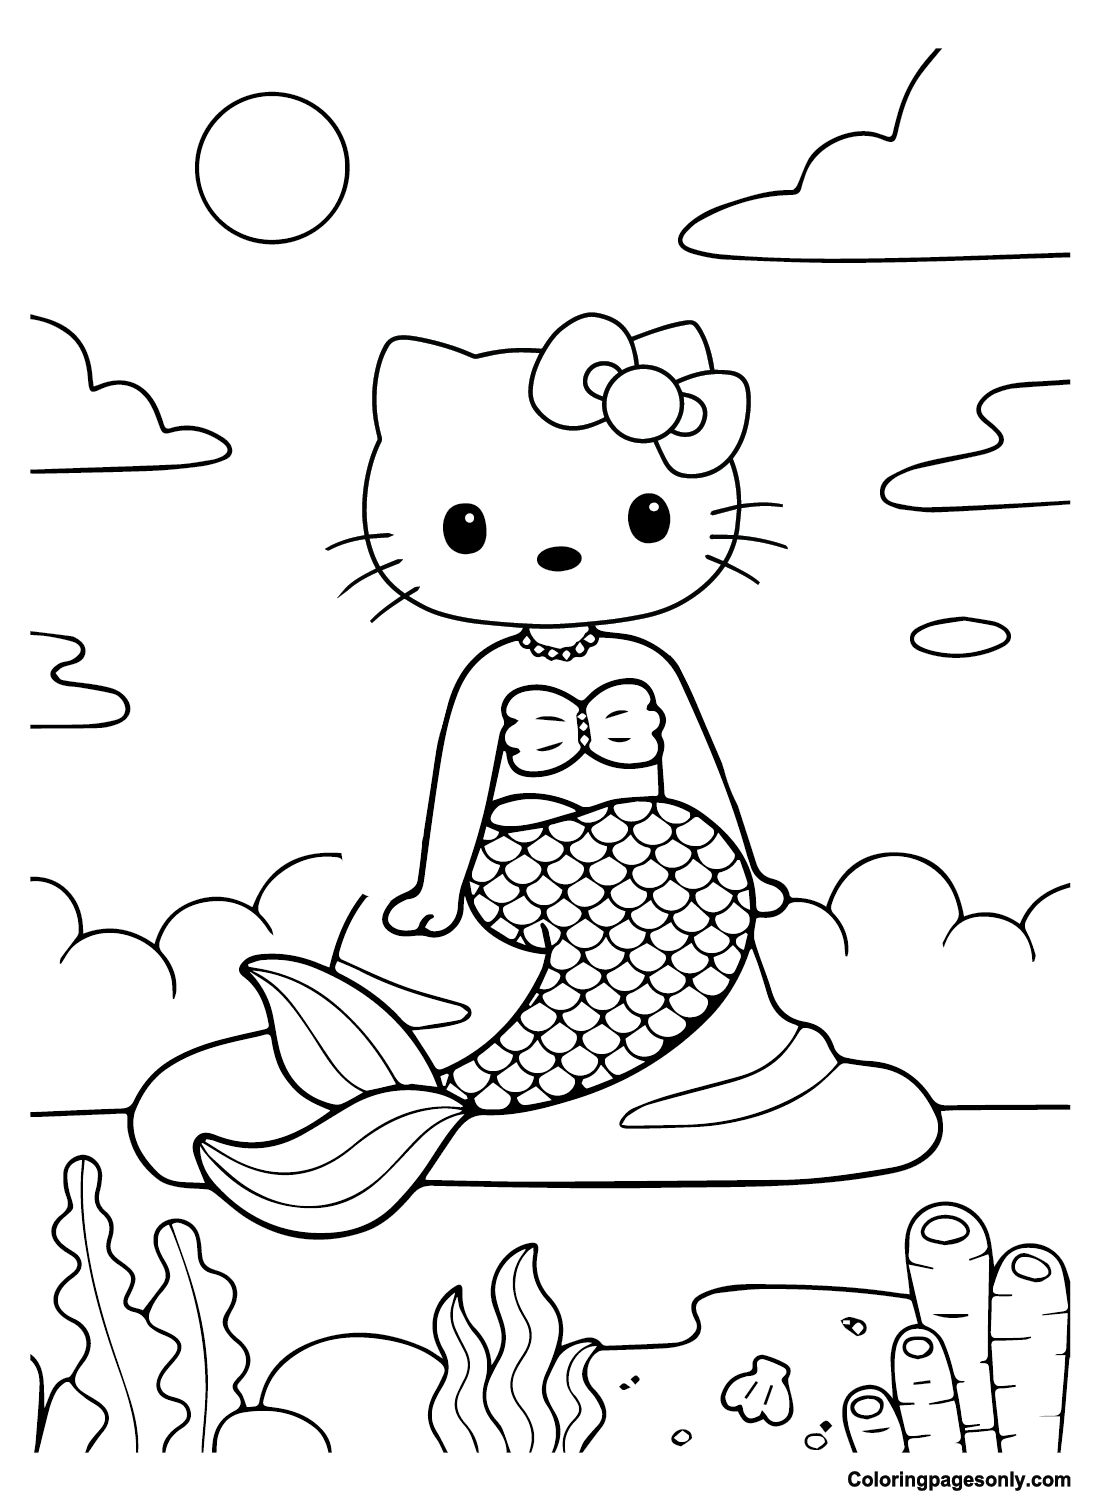 Hello Kitty as a Mermaid Coloring Page